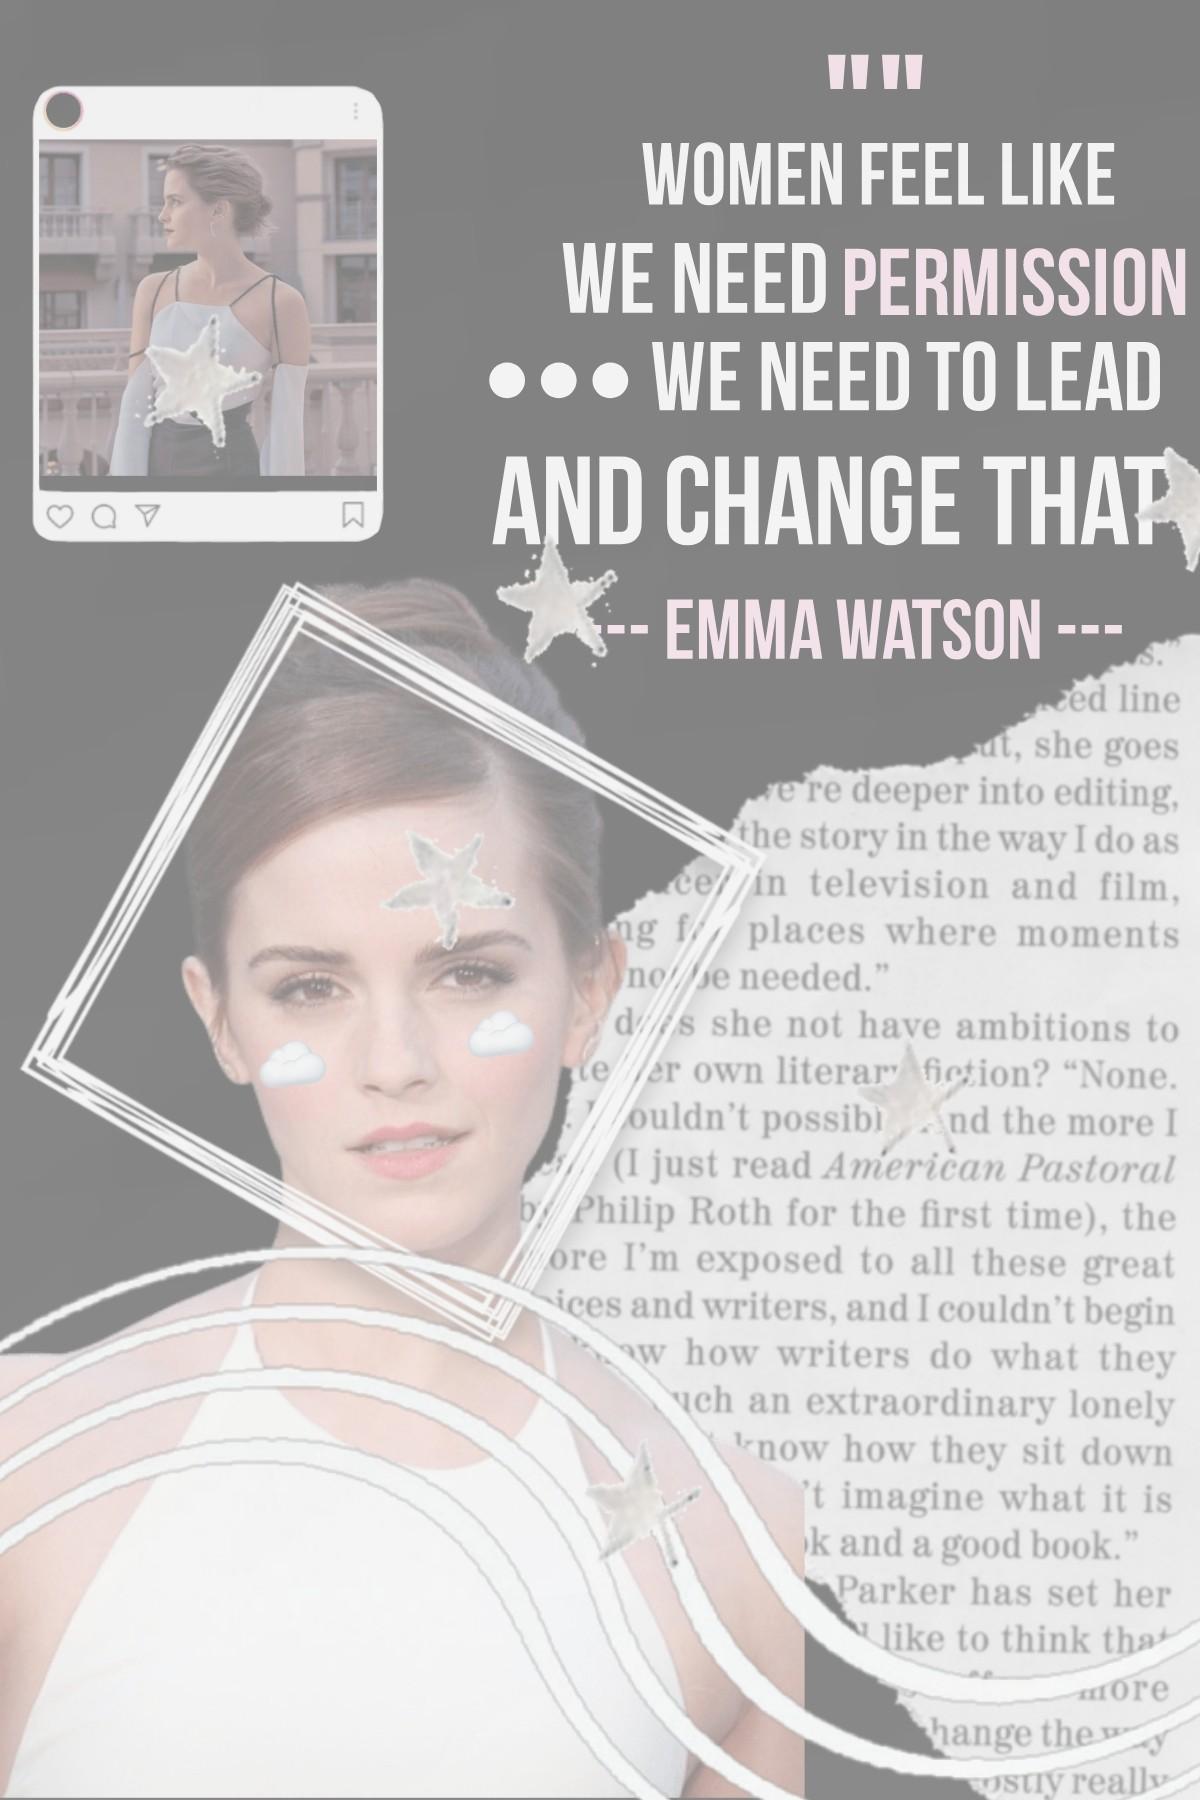 tap!
emma watson is super amazing and I her hard work